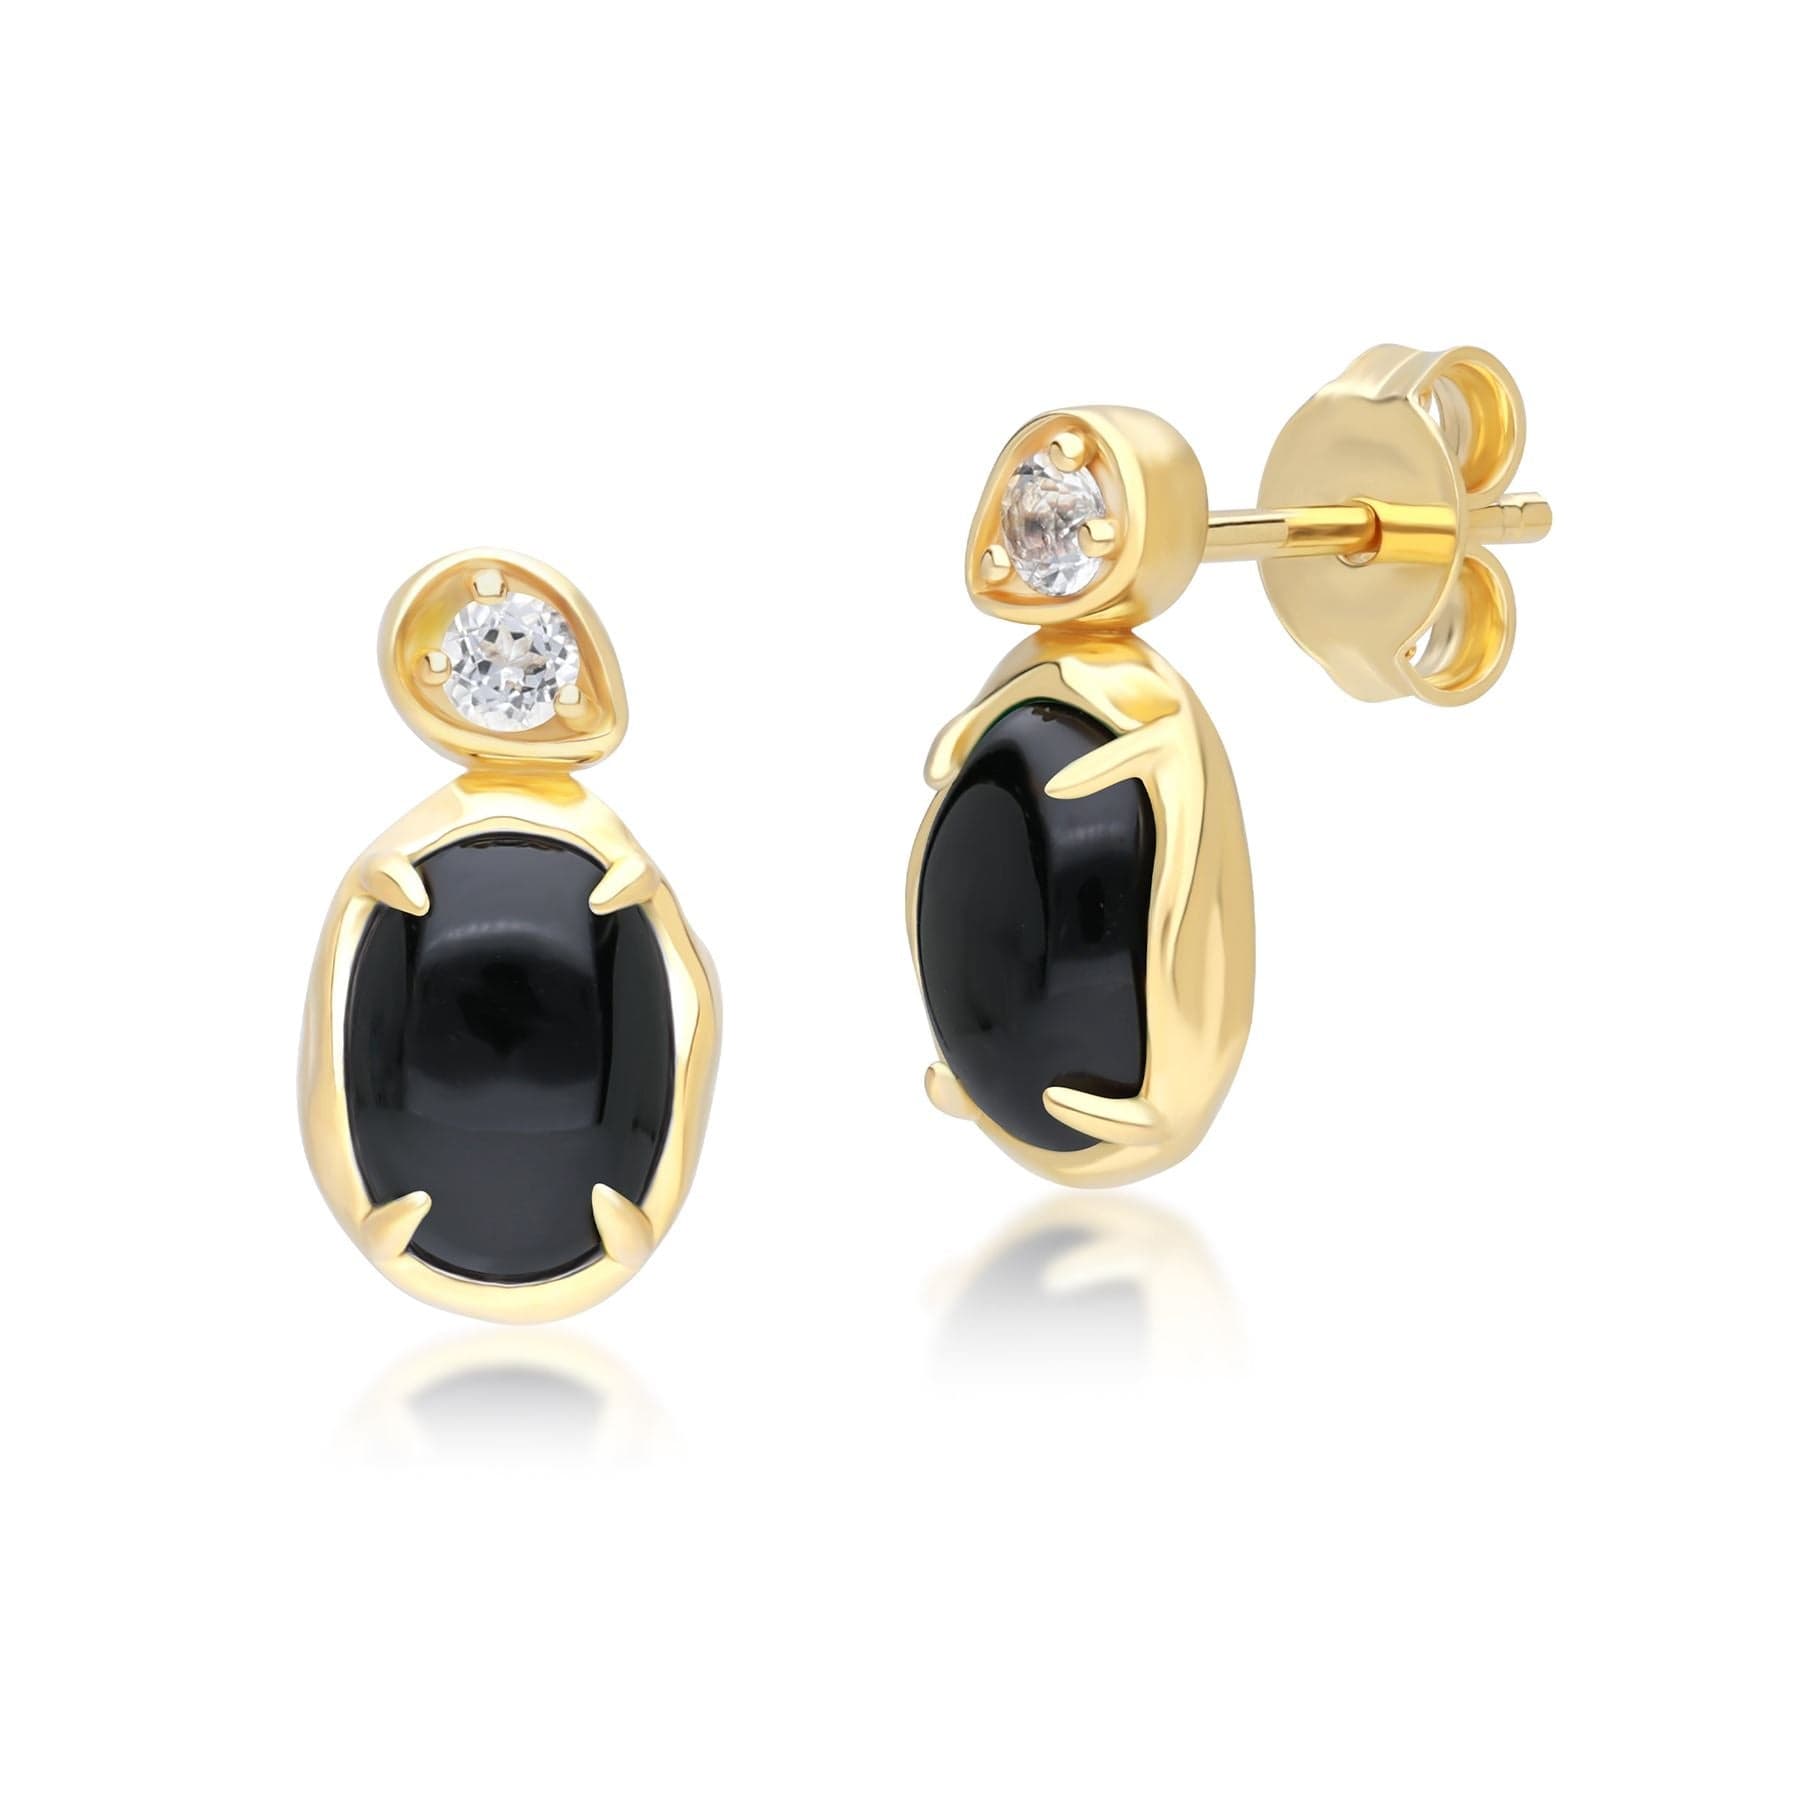 253E418803925 Irregular Oval Black Onyx & Topaz Drop Earrings In 18ct Gold Plated SterlIng Silver Front